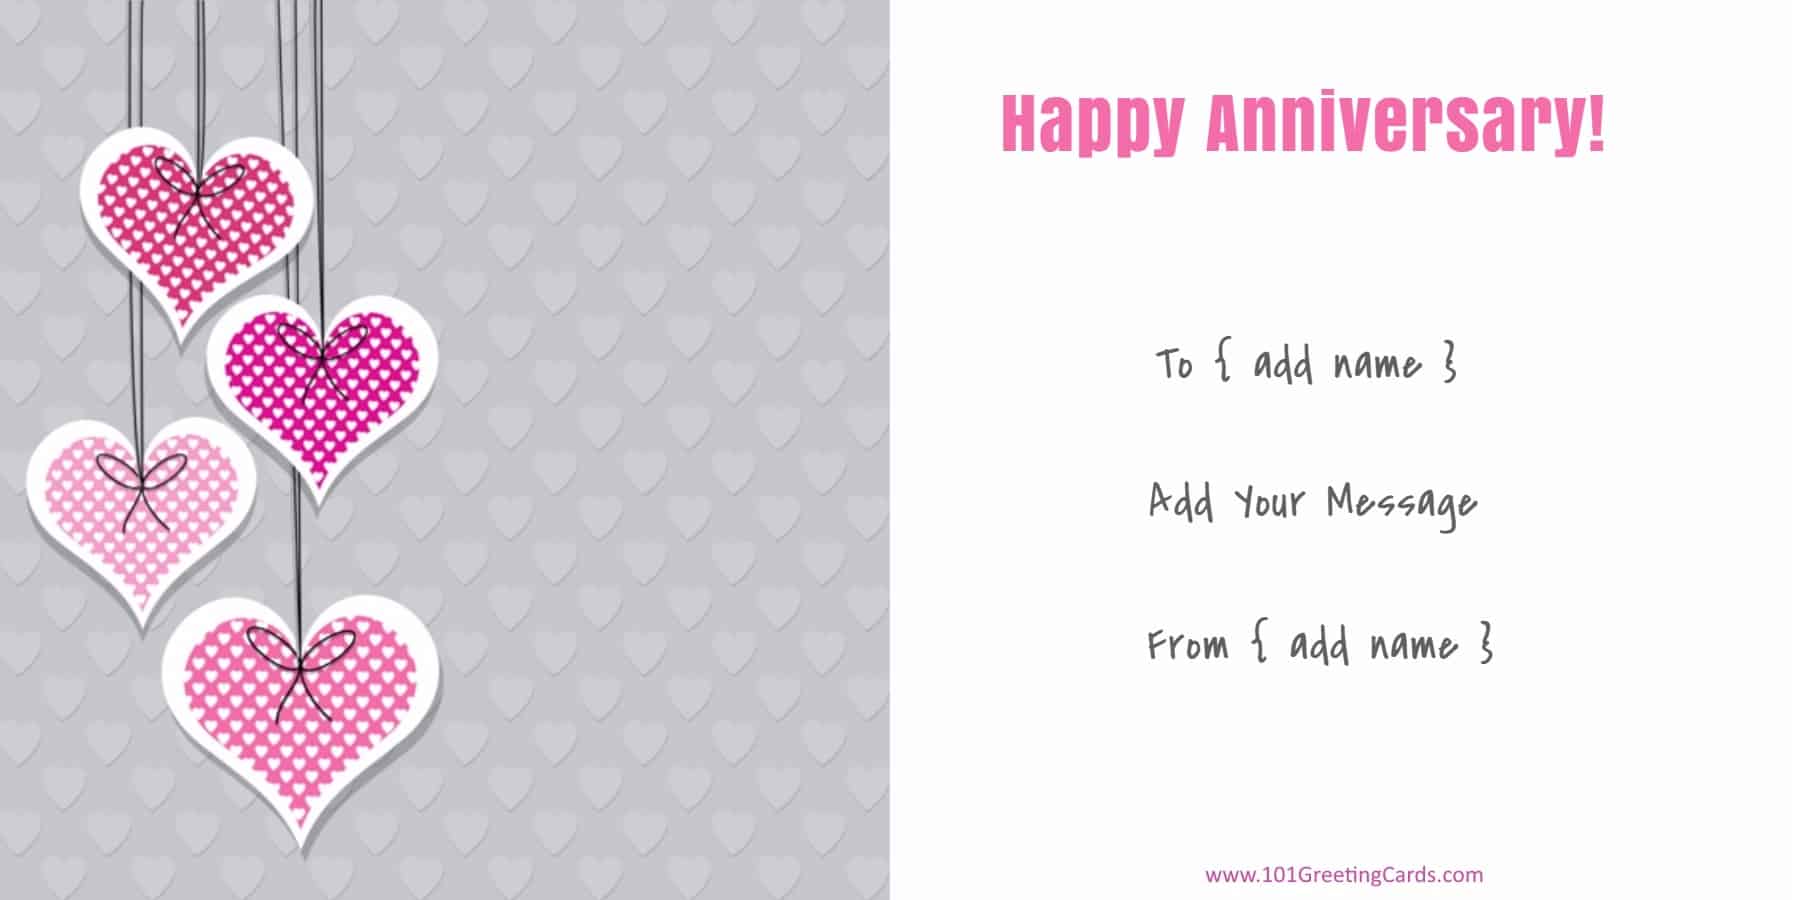 anniversary-cards-101-greeting-cards